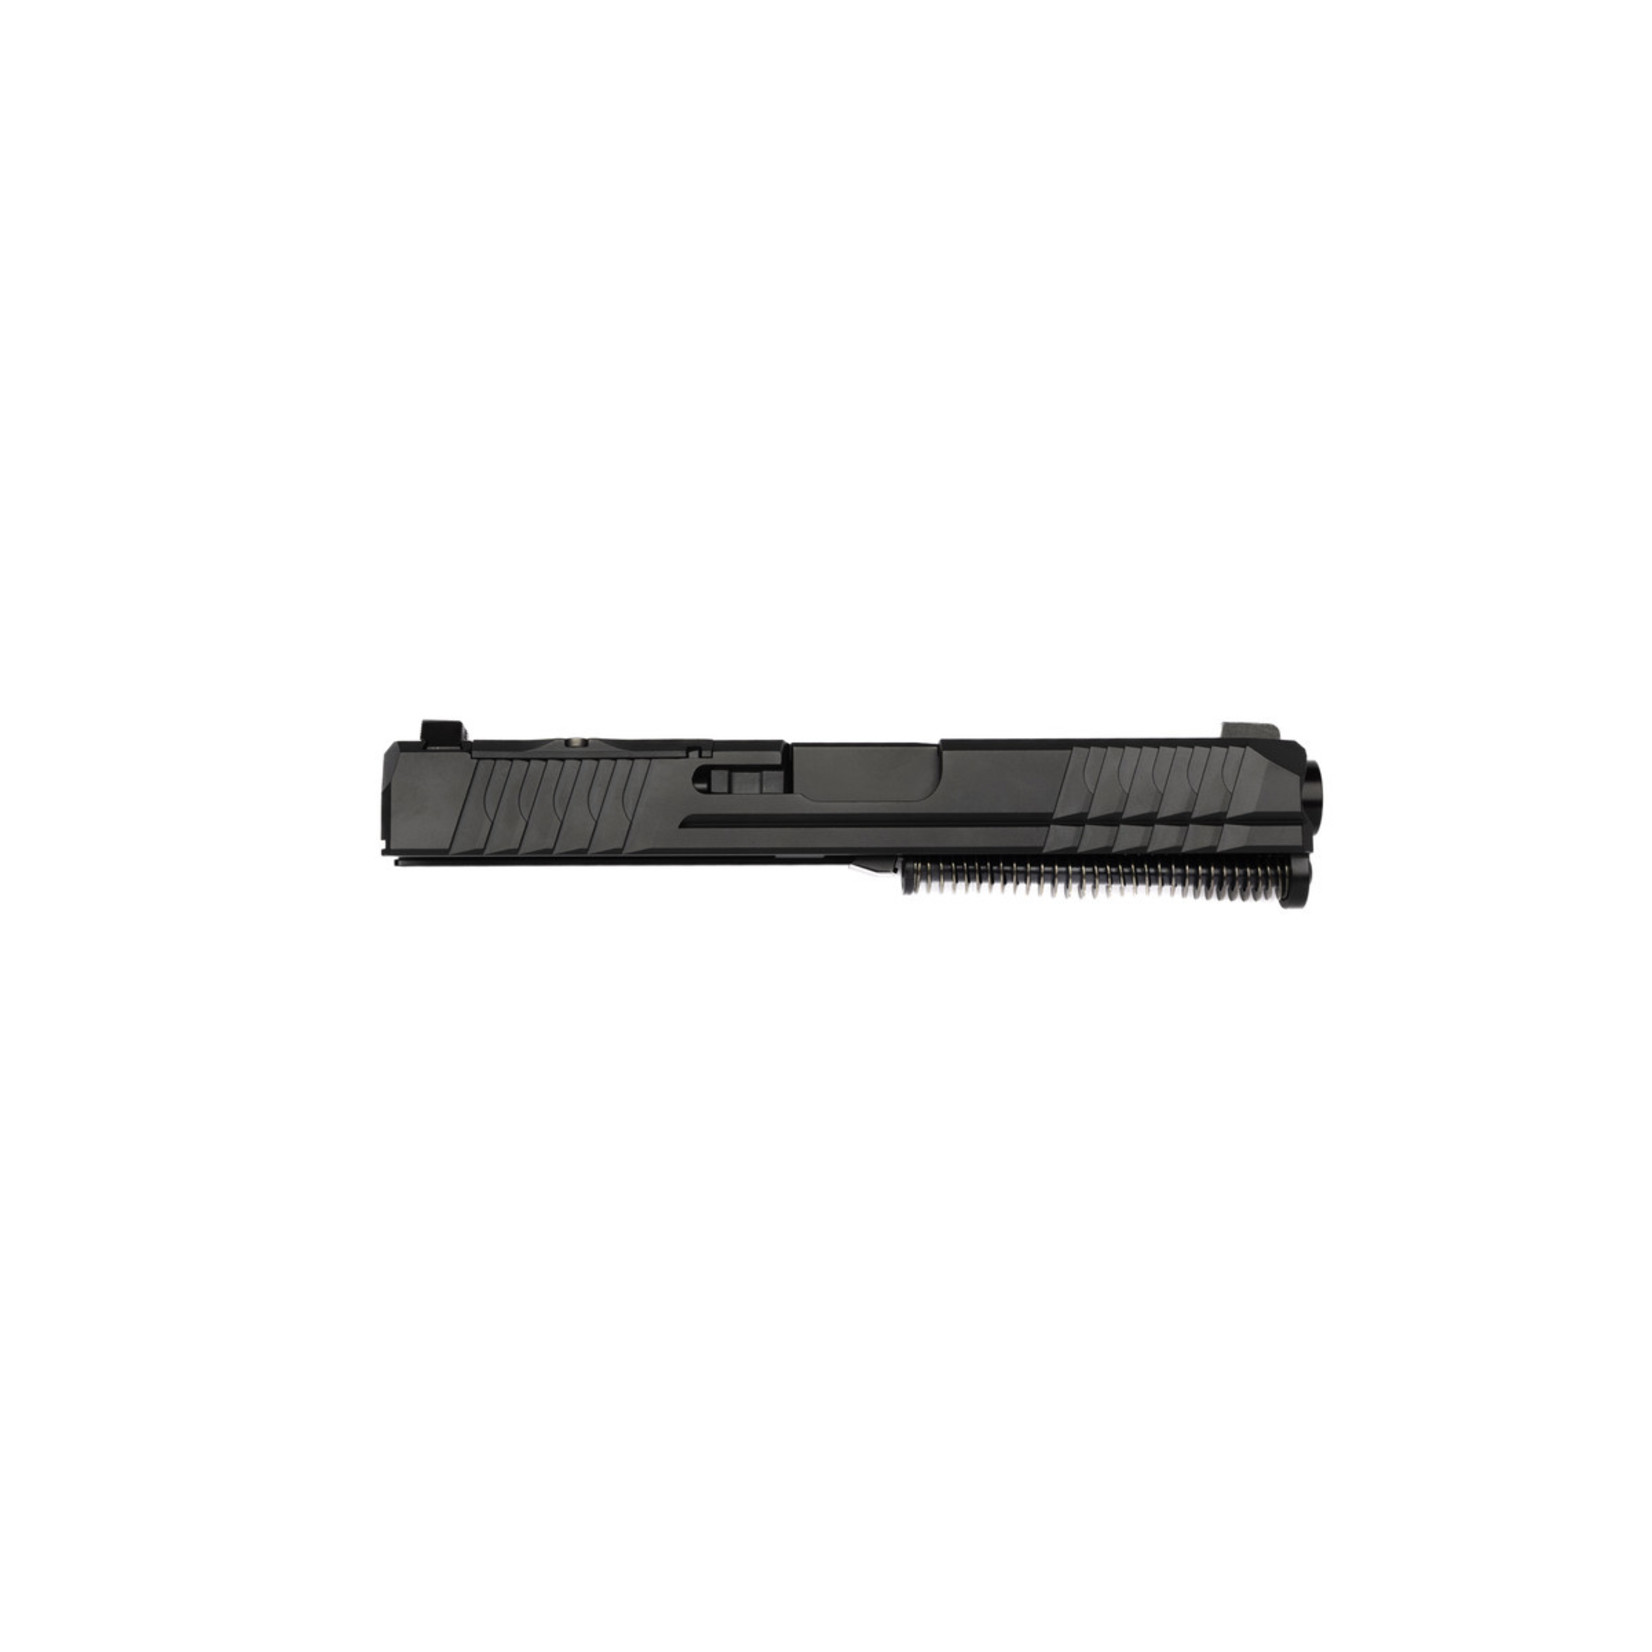 Poly80 PFC9/PF940C OCS Complete Slide Assembly - Compact - Black With SGW 106 mm Barrel